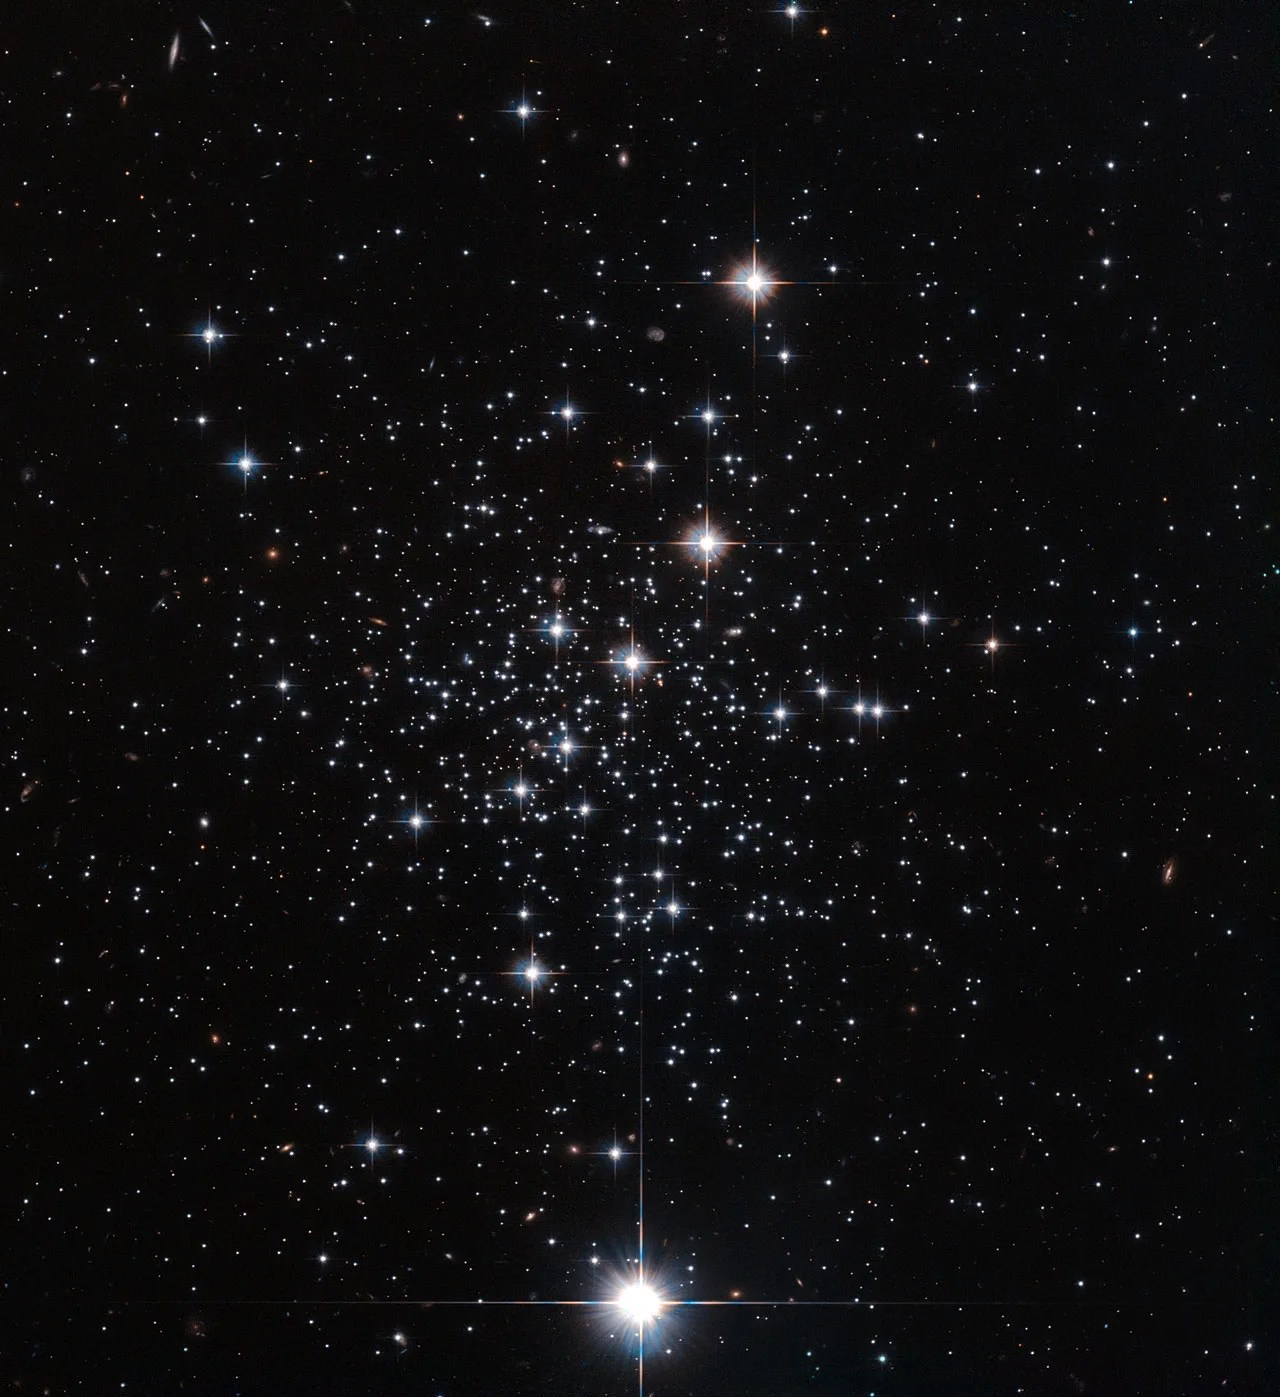 A scattered collection of bright white stars against the black background of space. The stars vary in brightness and some have t-shaped diffraction spikes.